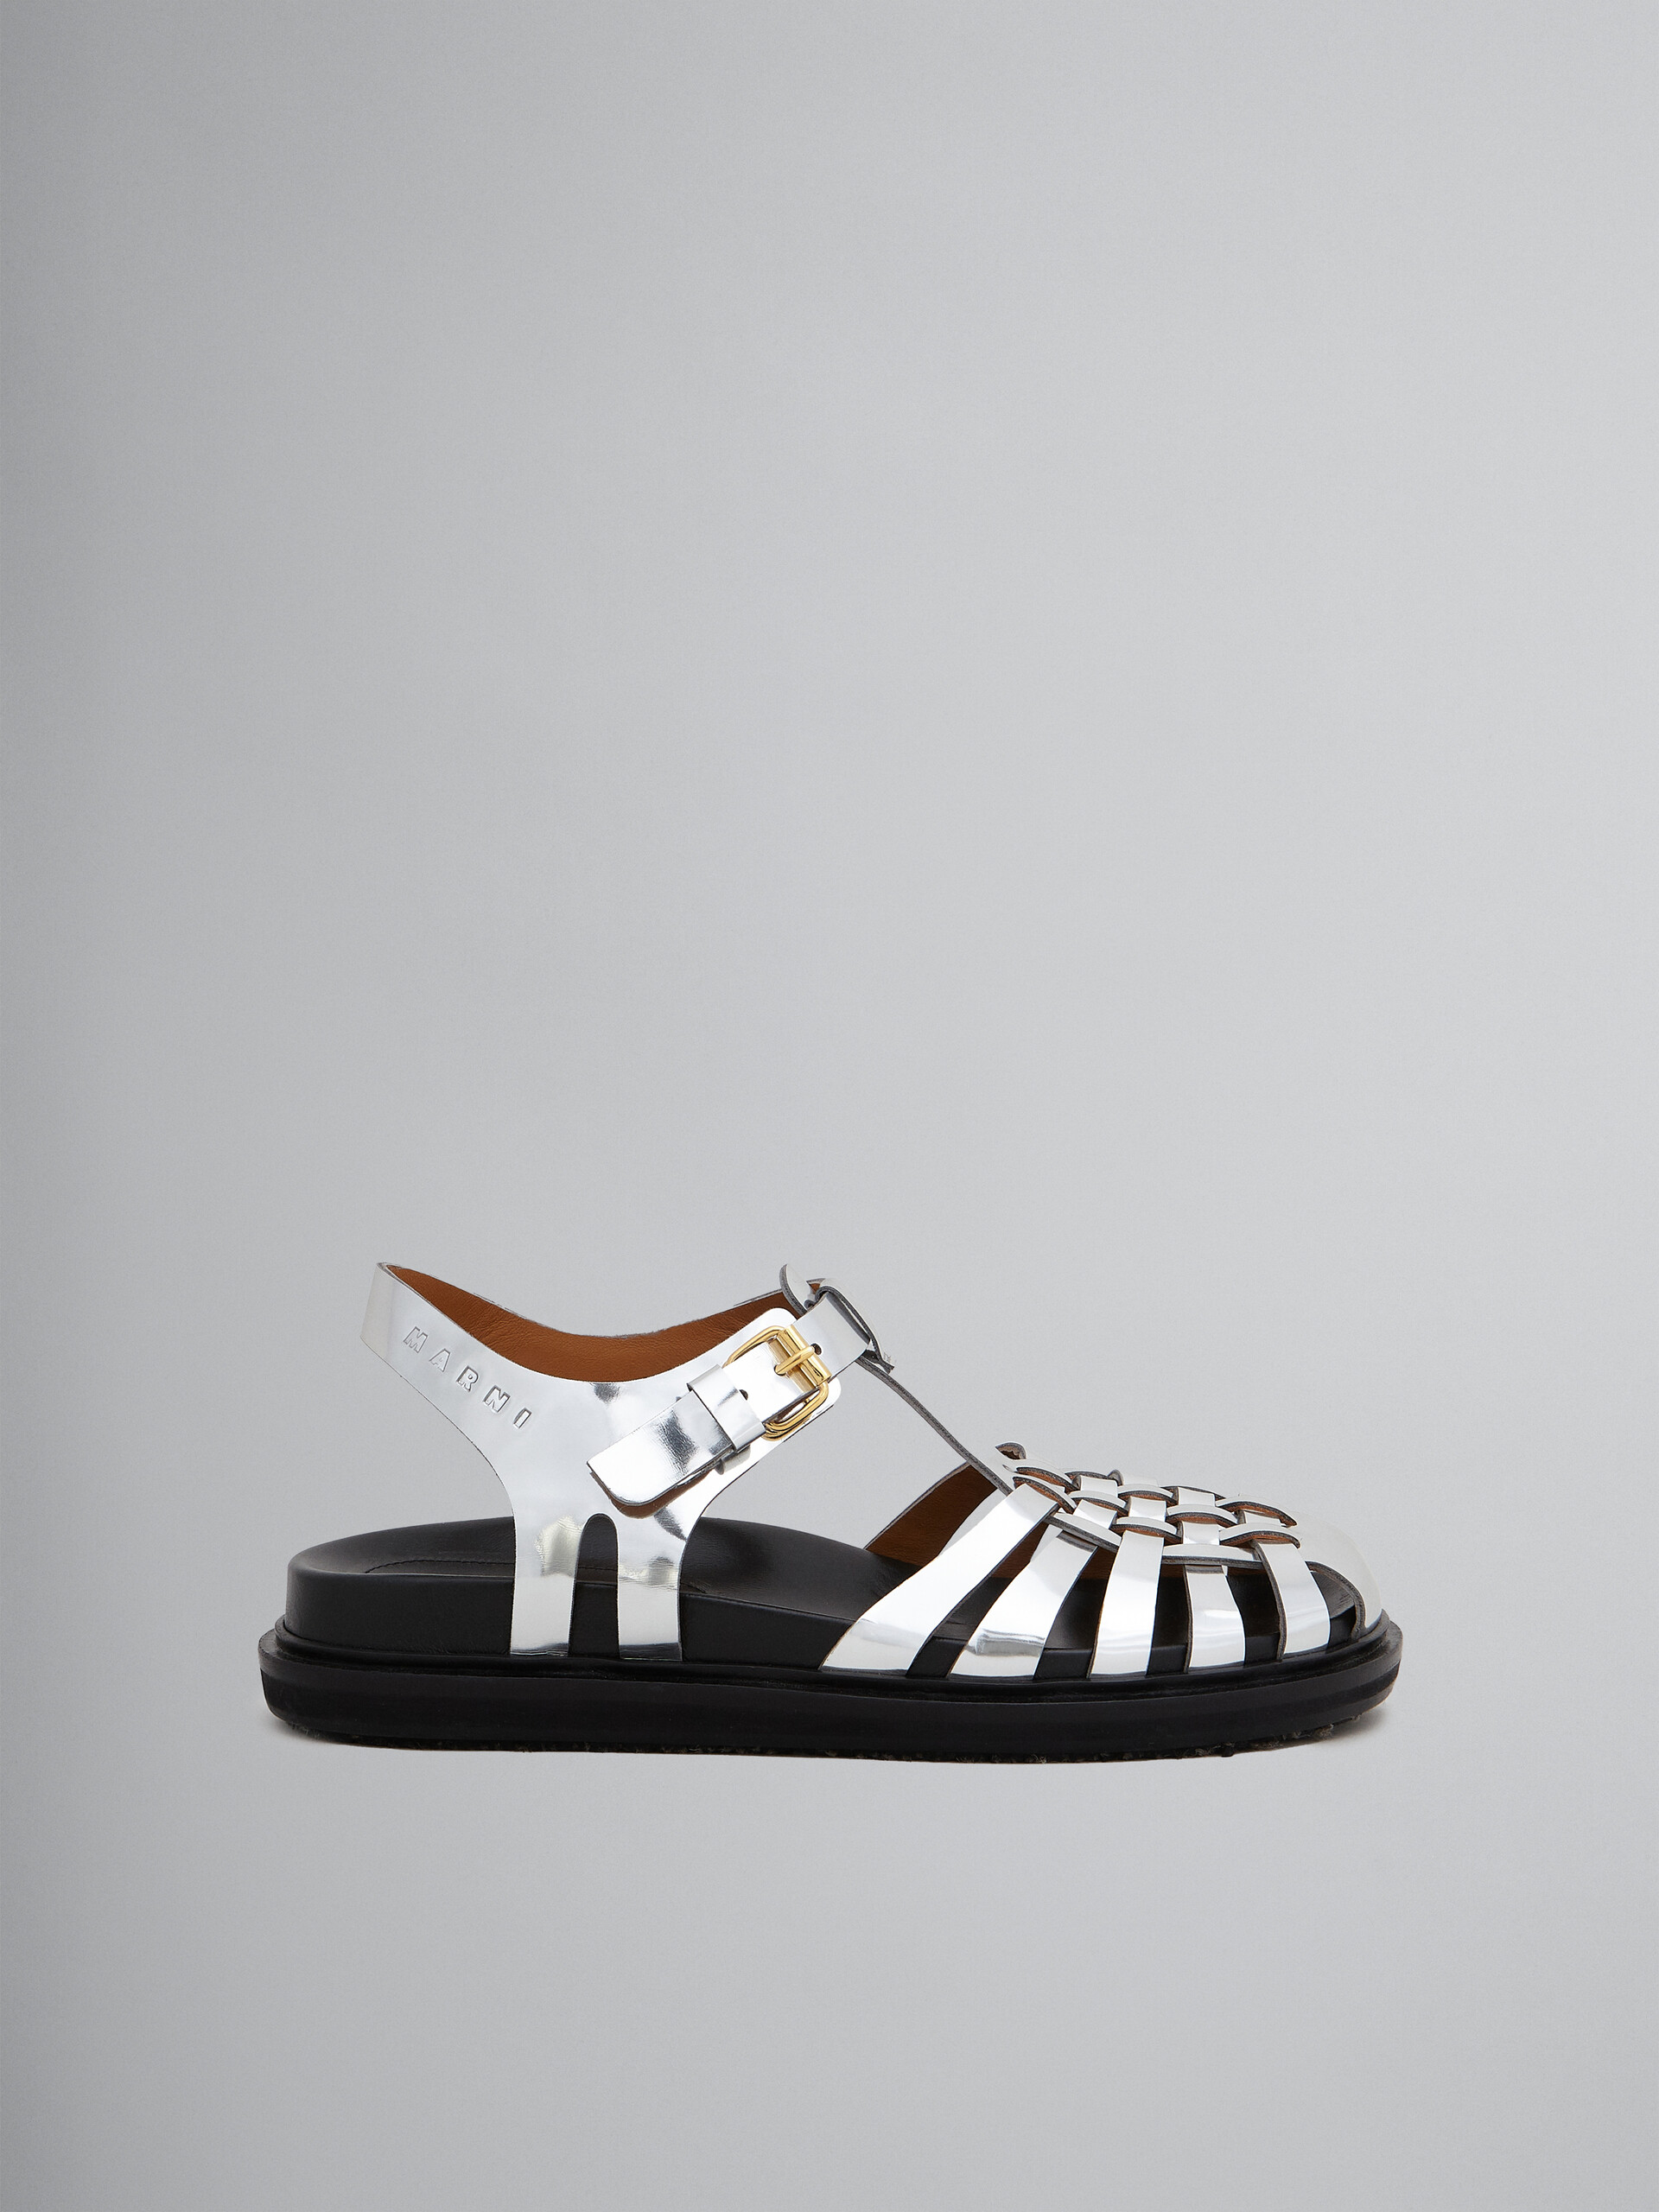 Silver mirrored leather fisherman's sandal - Sandals - Image 1